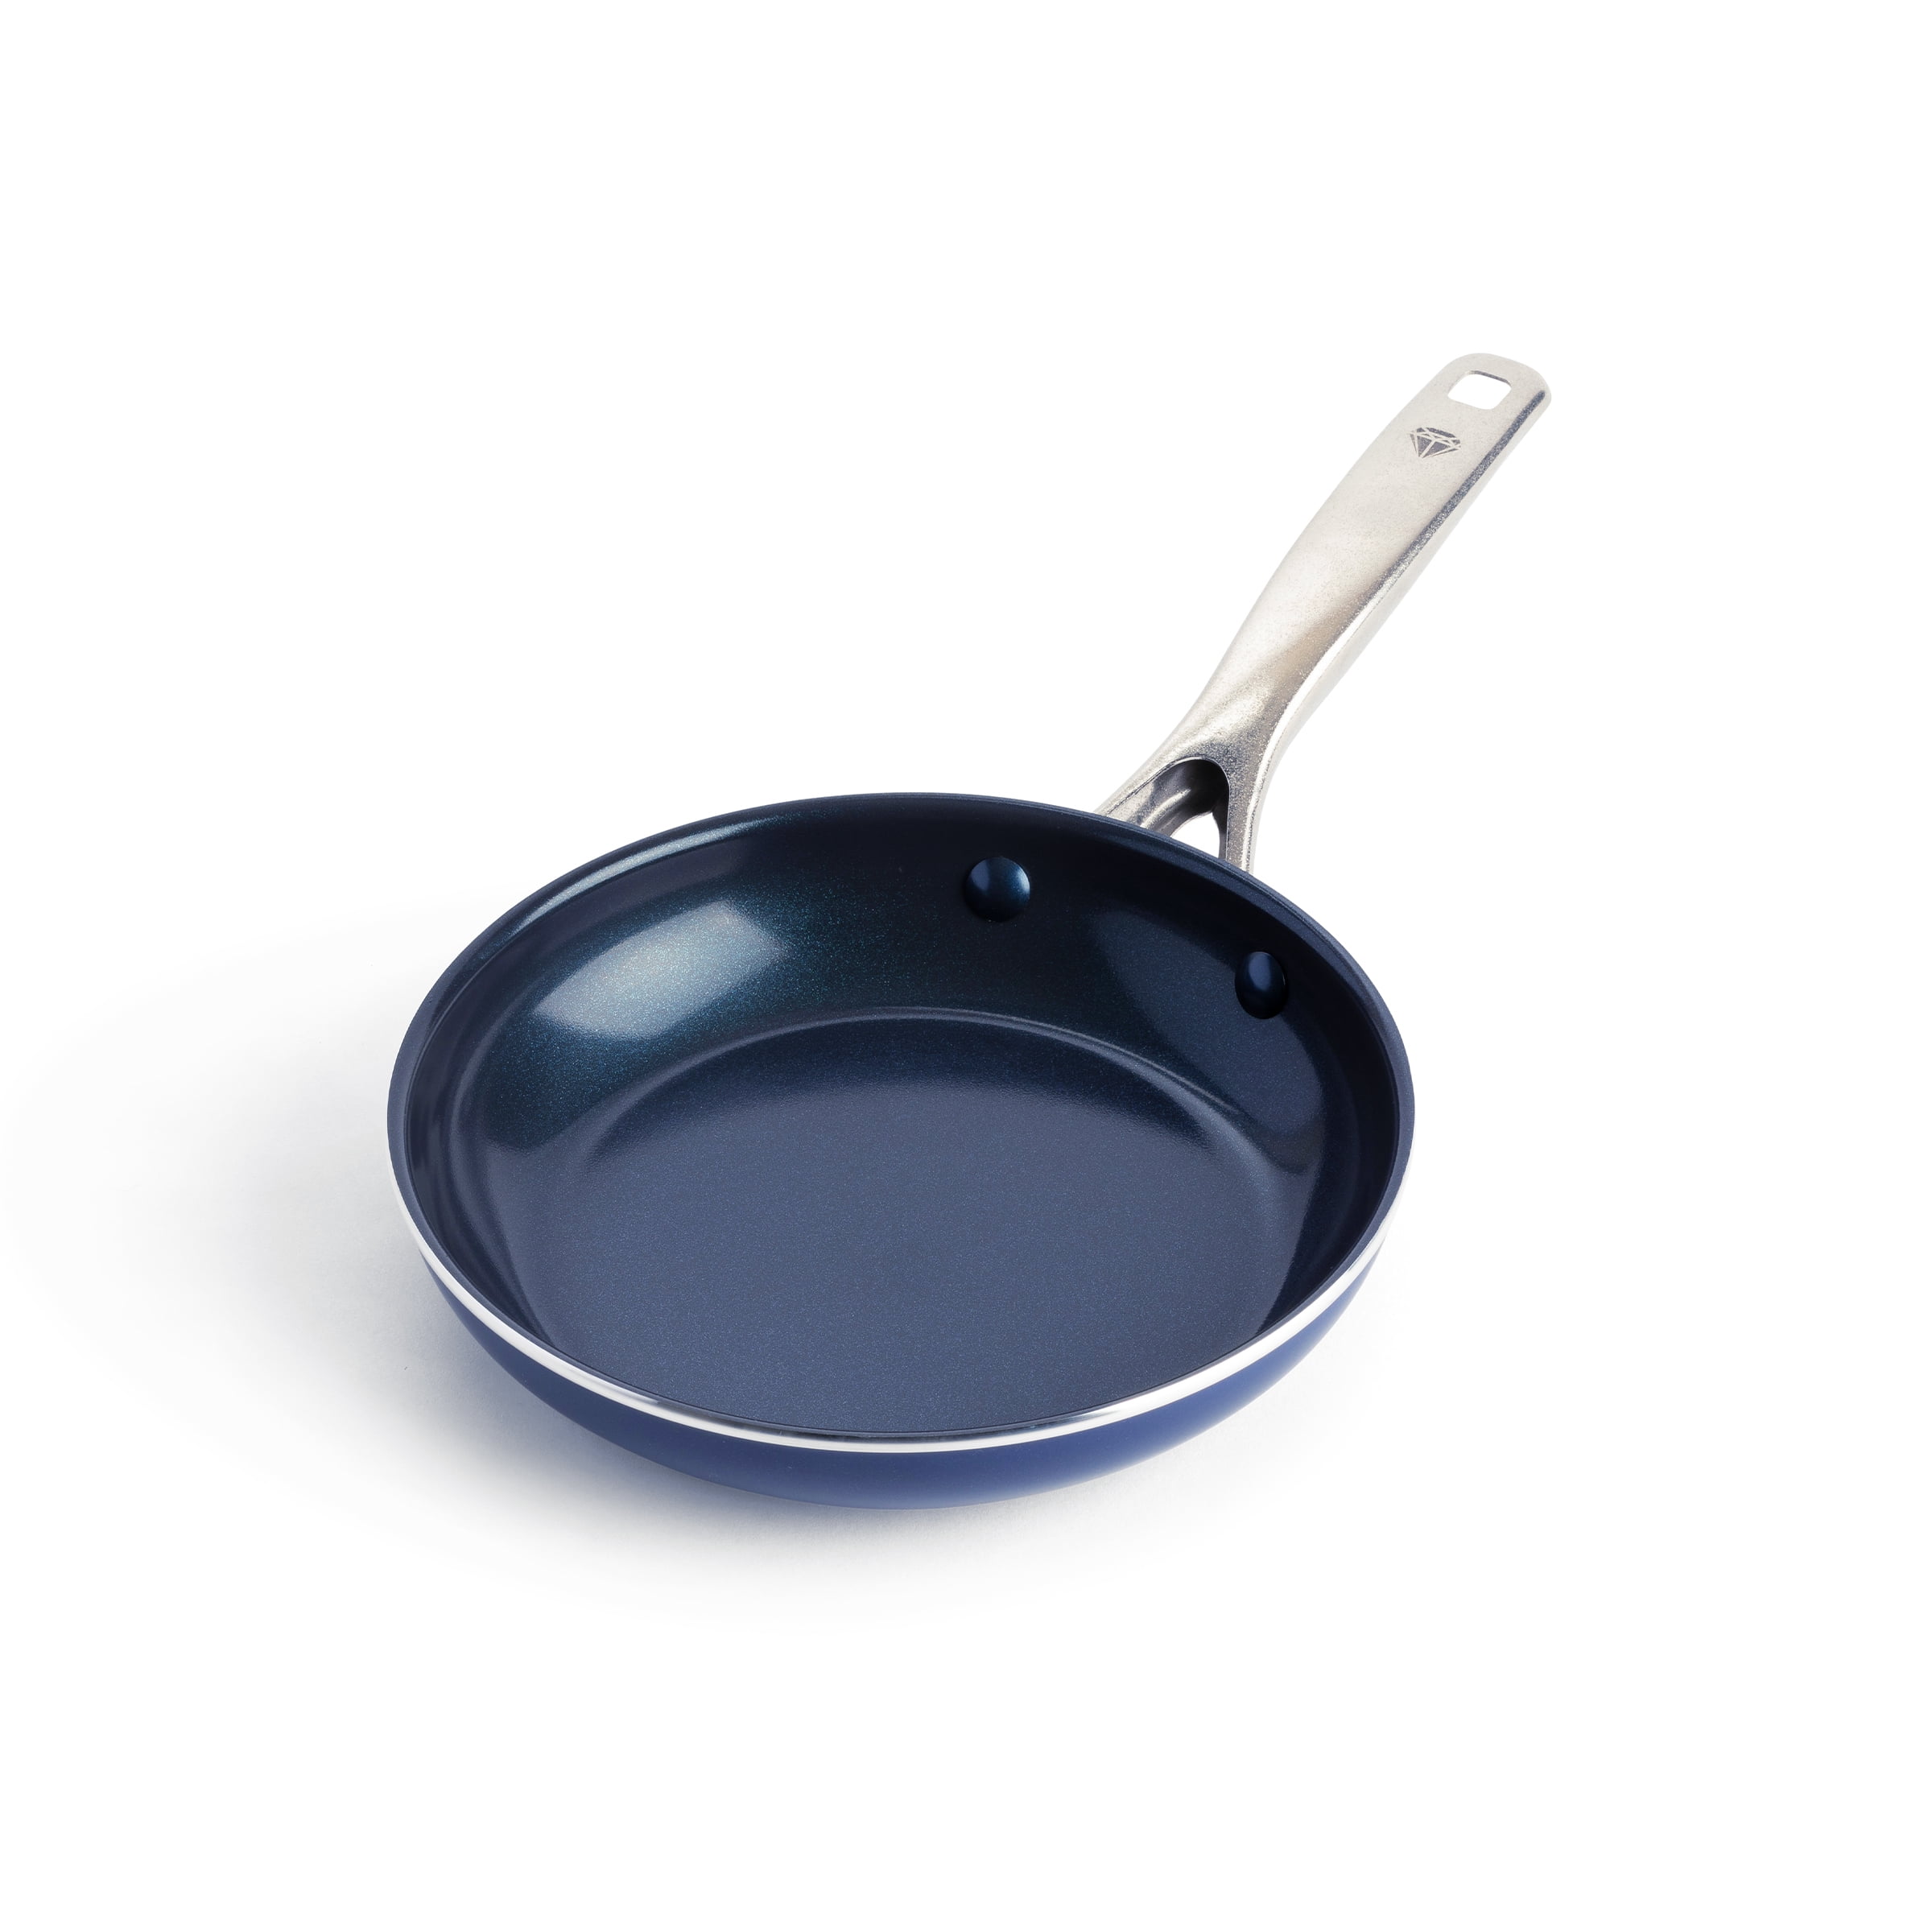 Smart Home 12-inch Non-Stick Fry Pan in Turquoise 